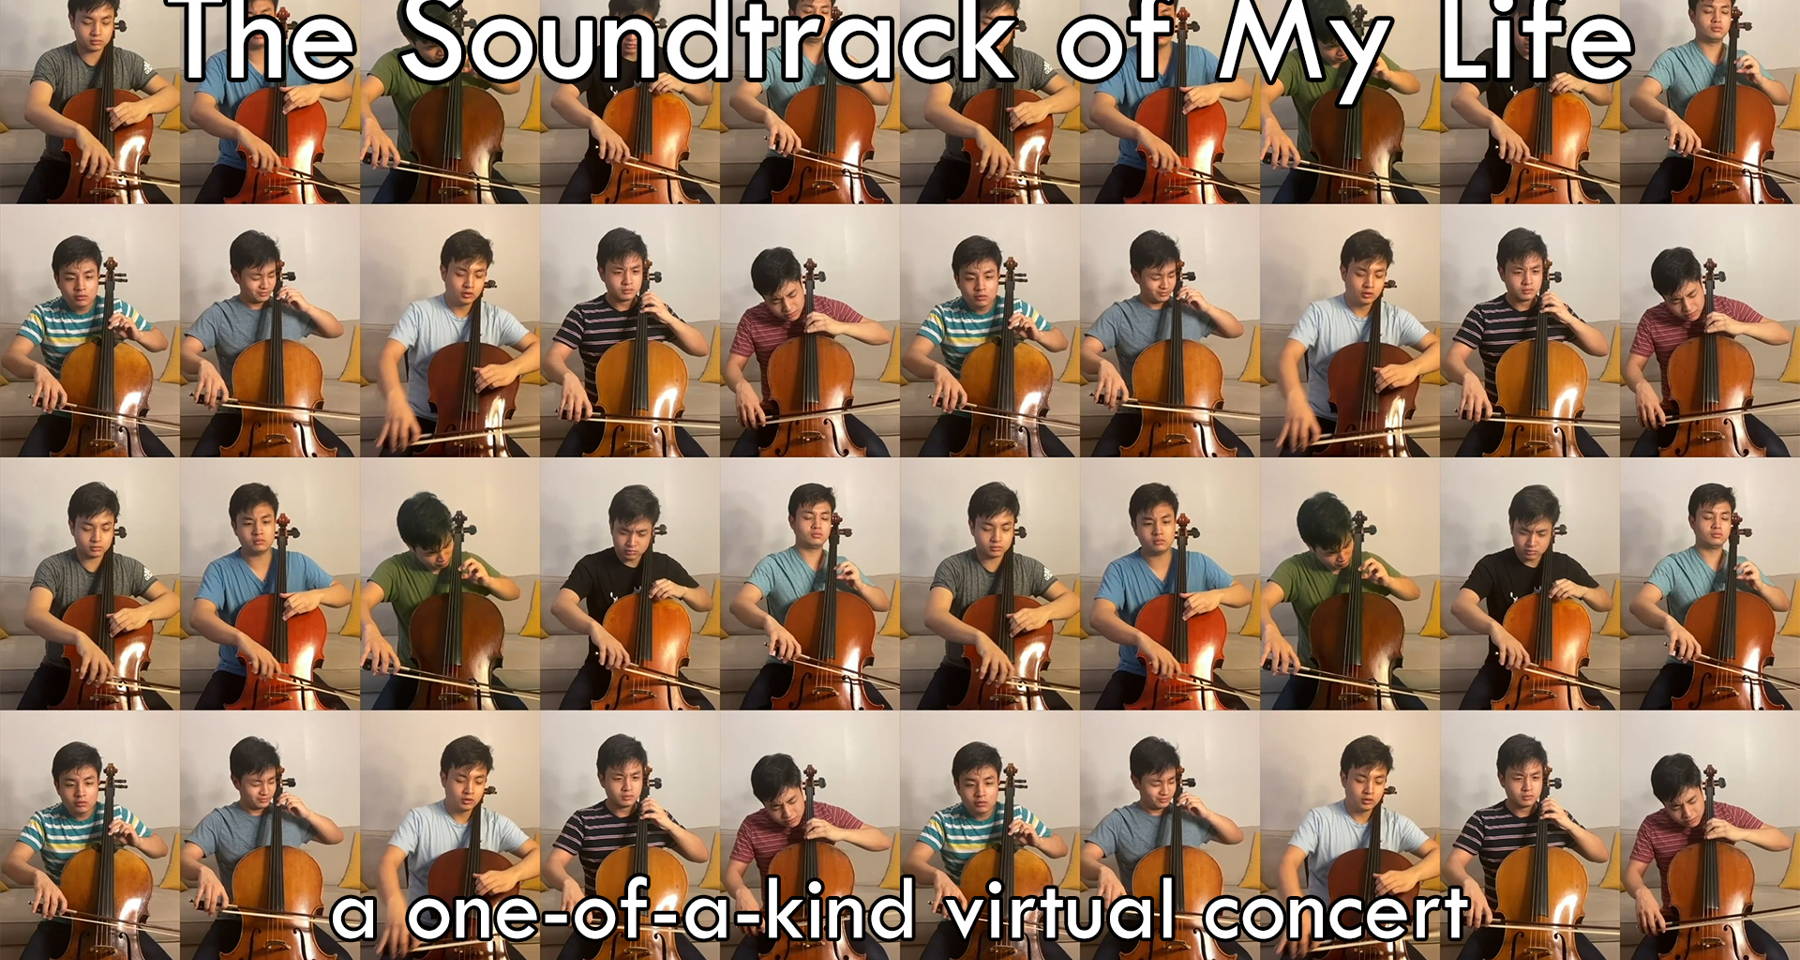 The Soundtrack of My Life: A multi-track cello concert by Jeremy Tai